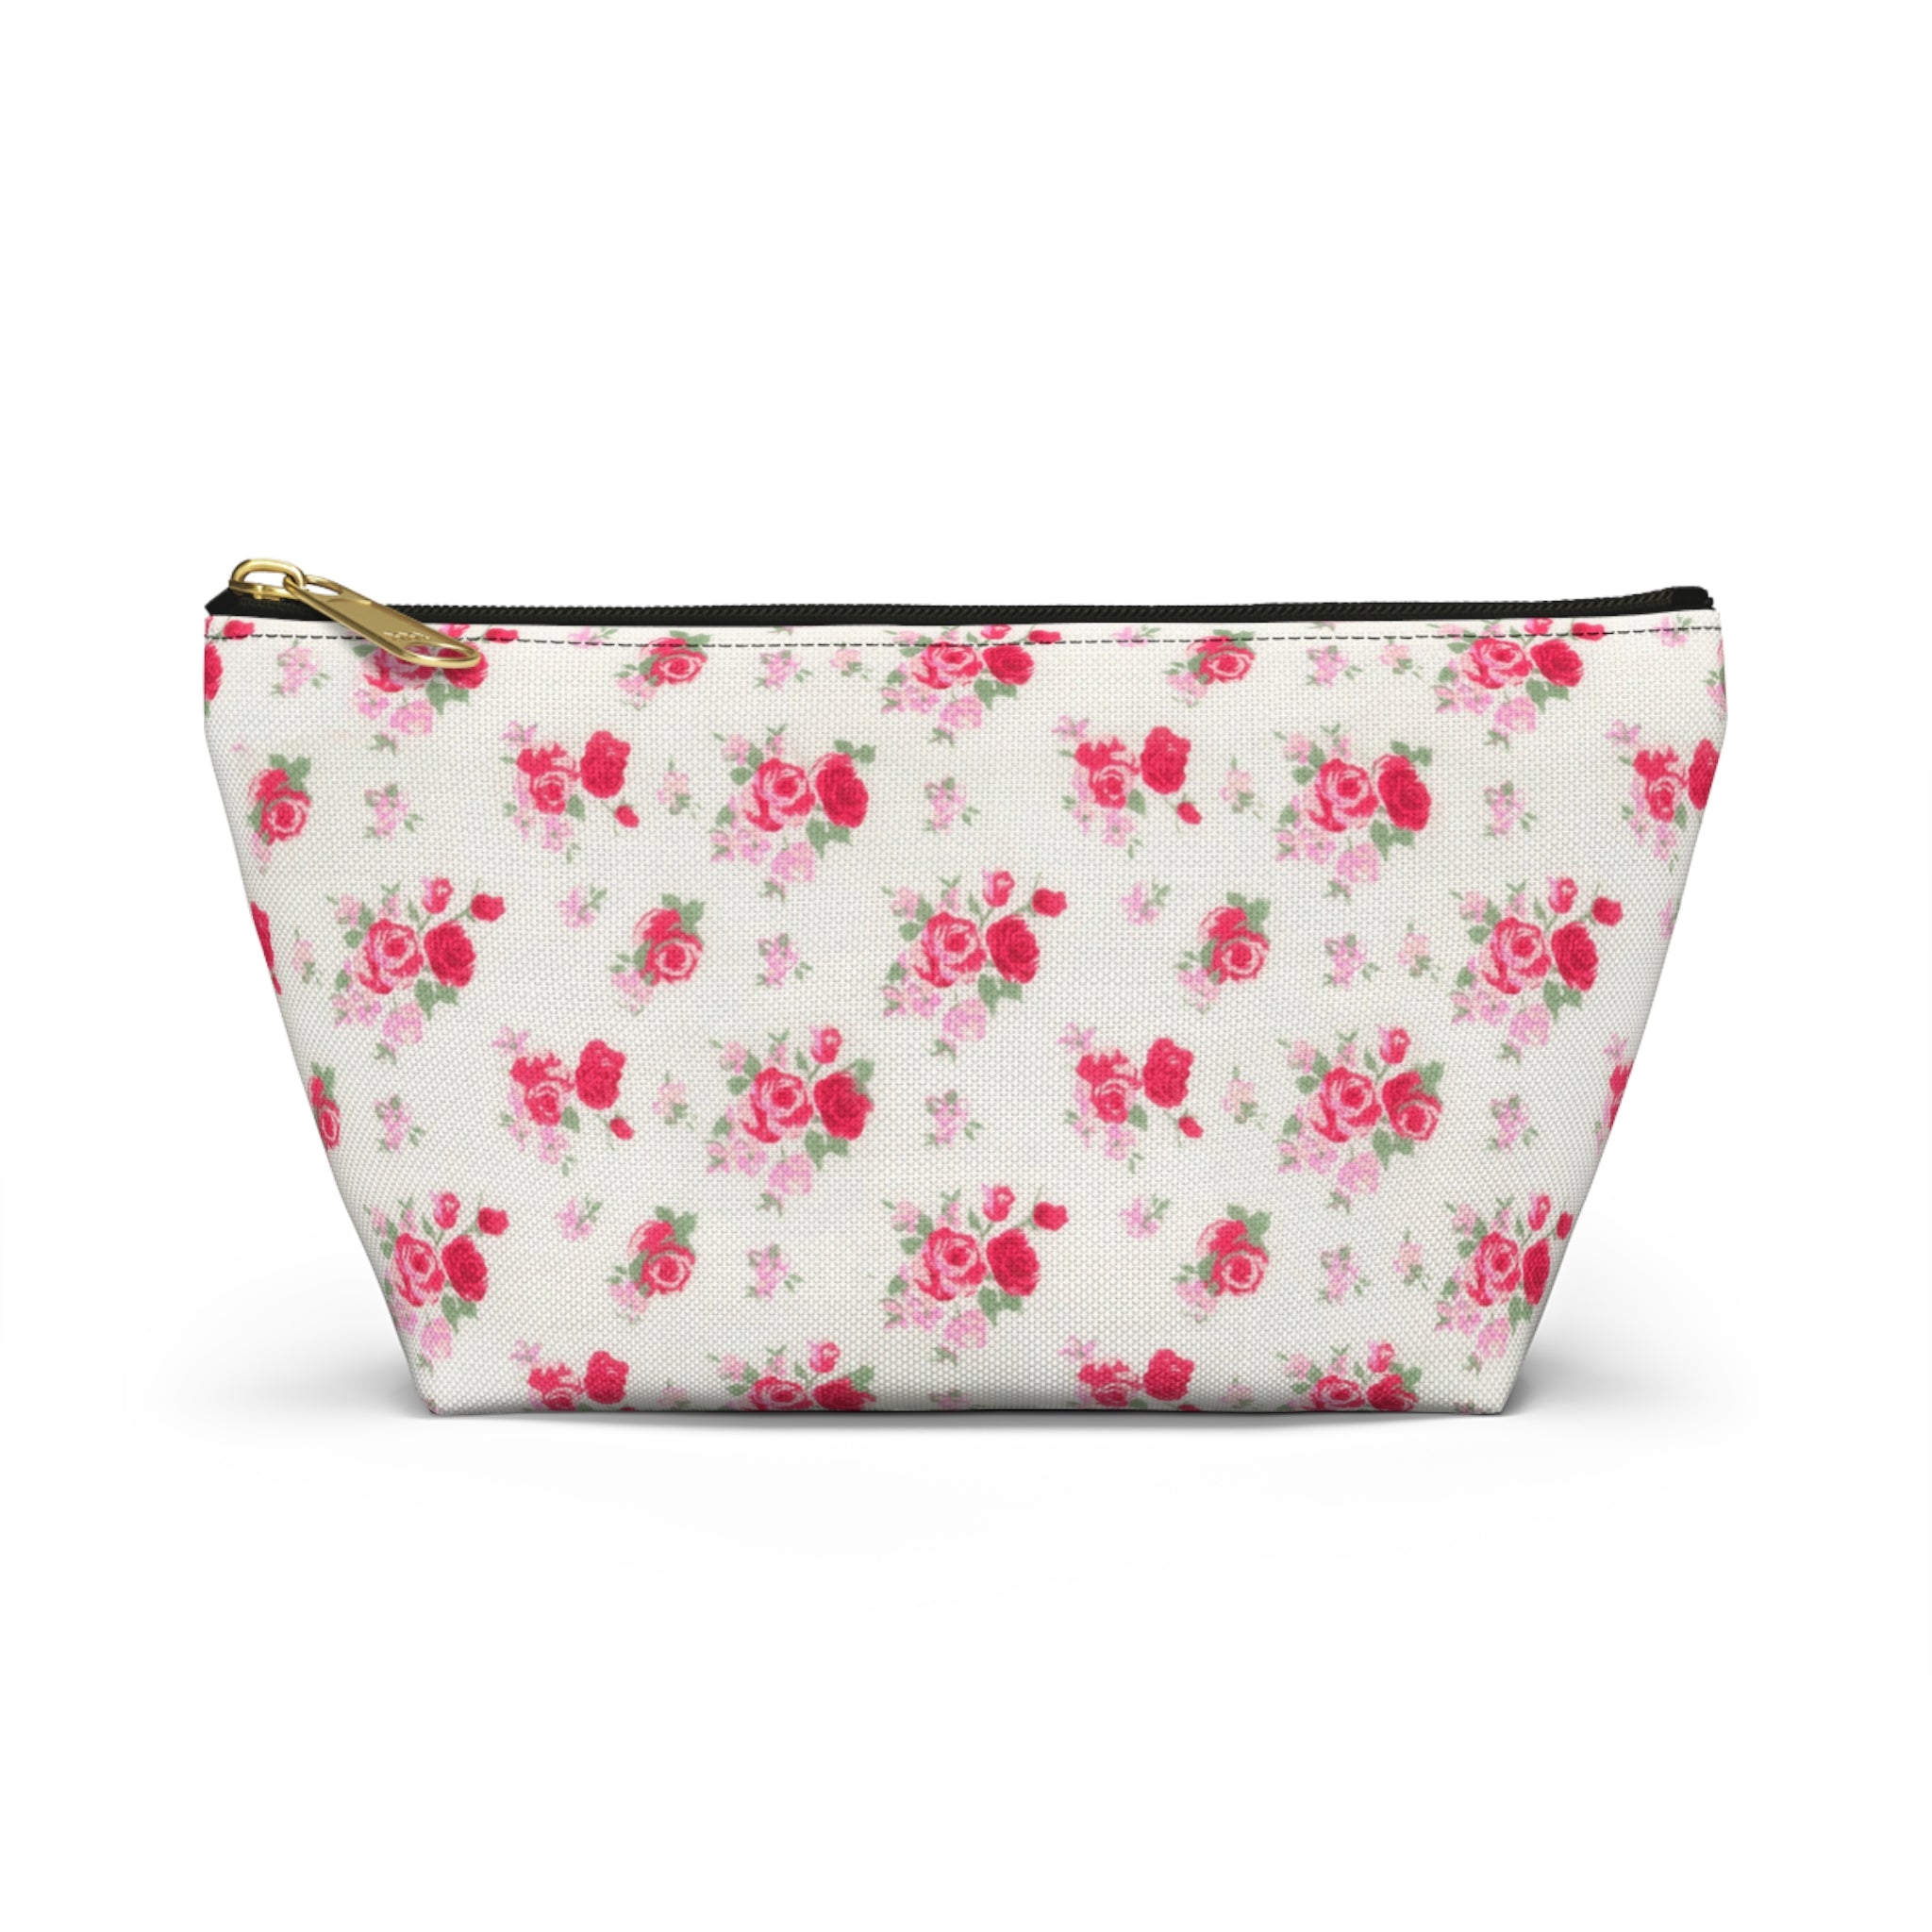 Bag, Coquette Bag, Coquette Make up bag, Coquette zipper pouch